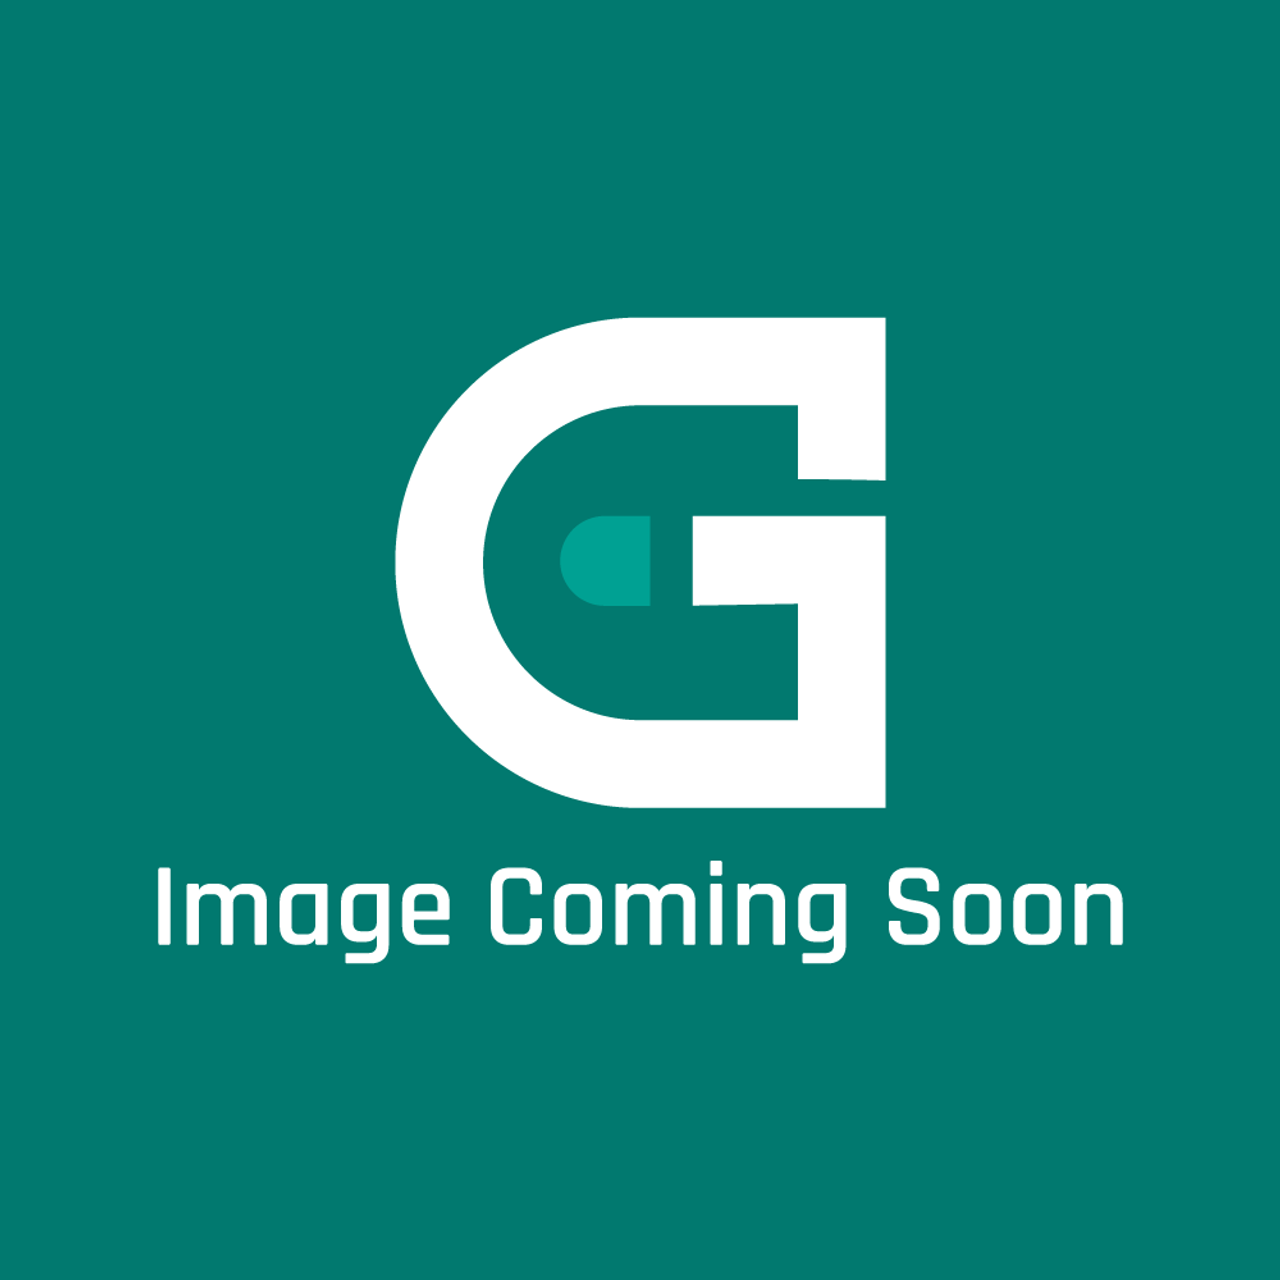 GE Appliances WR14X10080 - Gasket Shield Lower - Image Coming Soon!